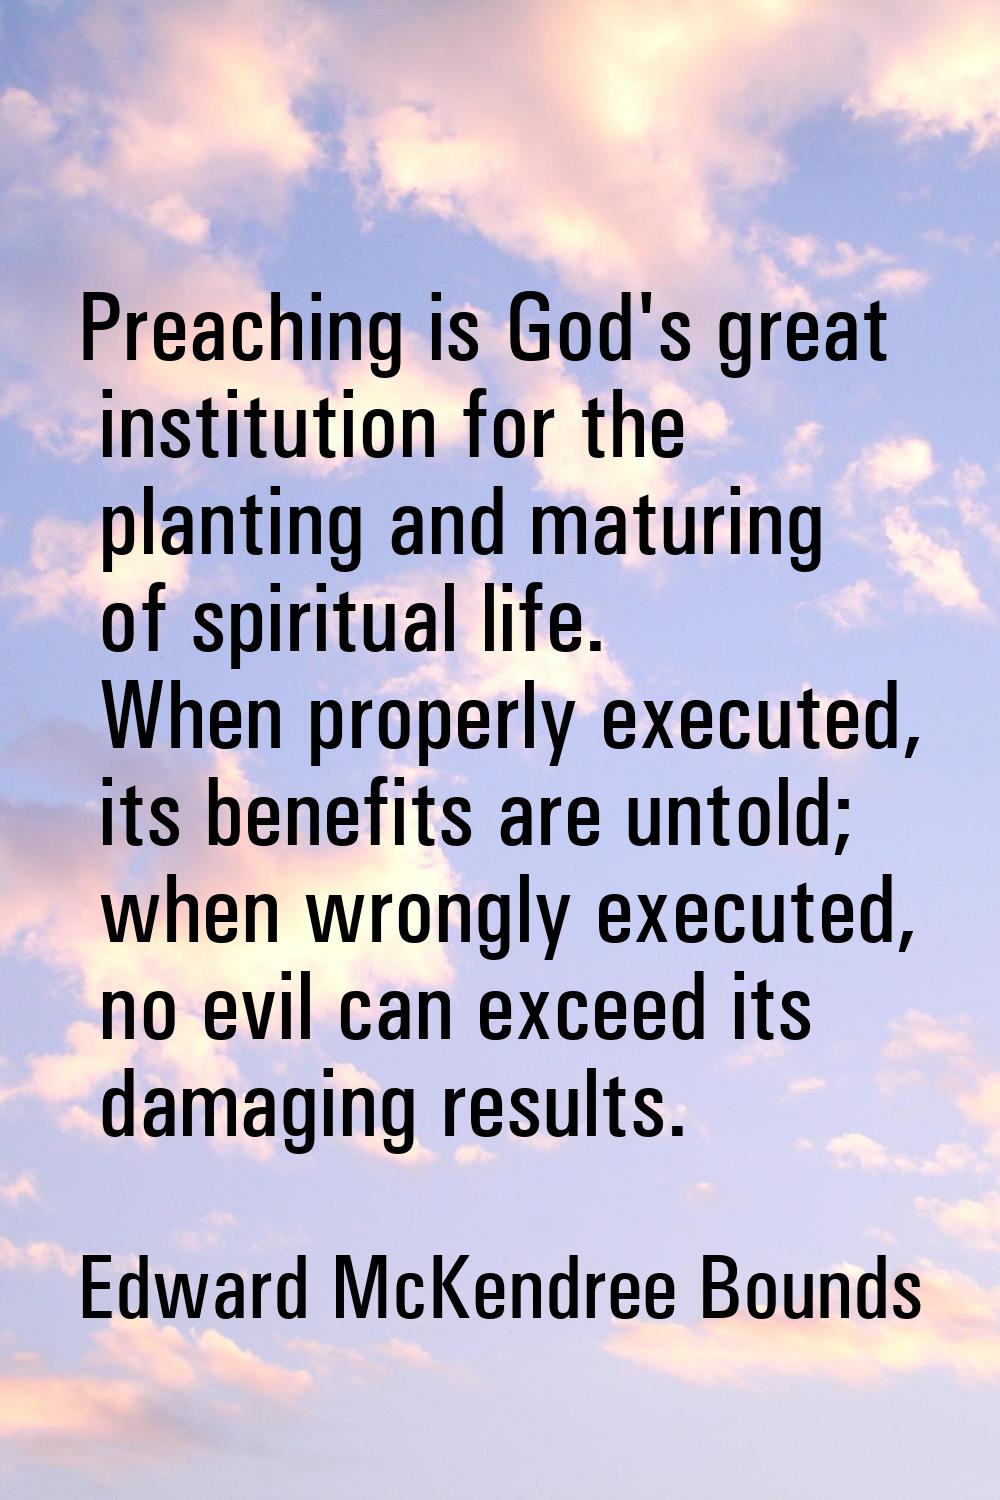 Preaching is God's great institution for the planting and maturing of spiritual life. When properly